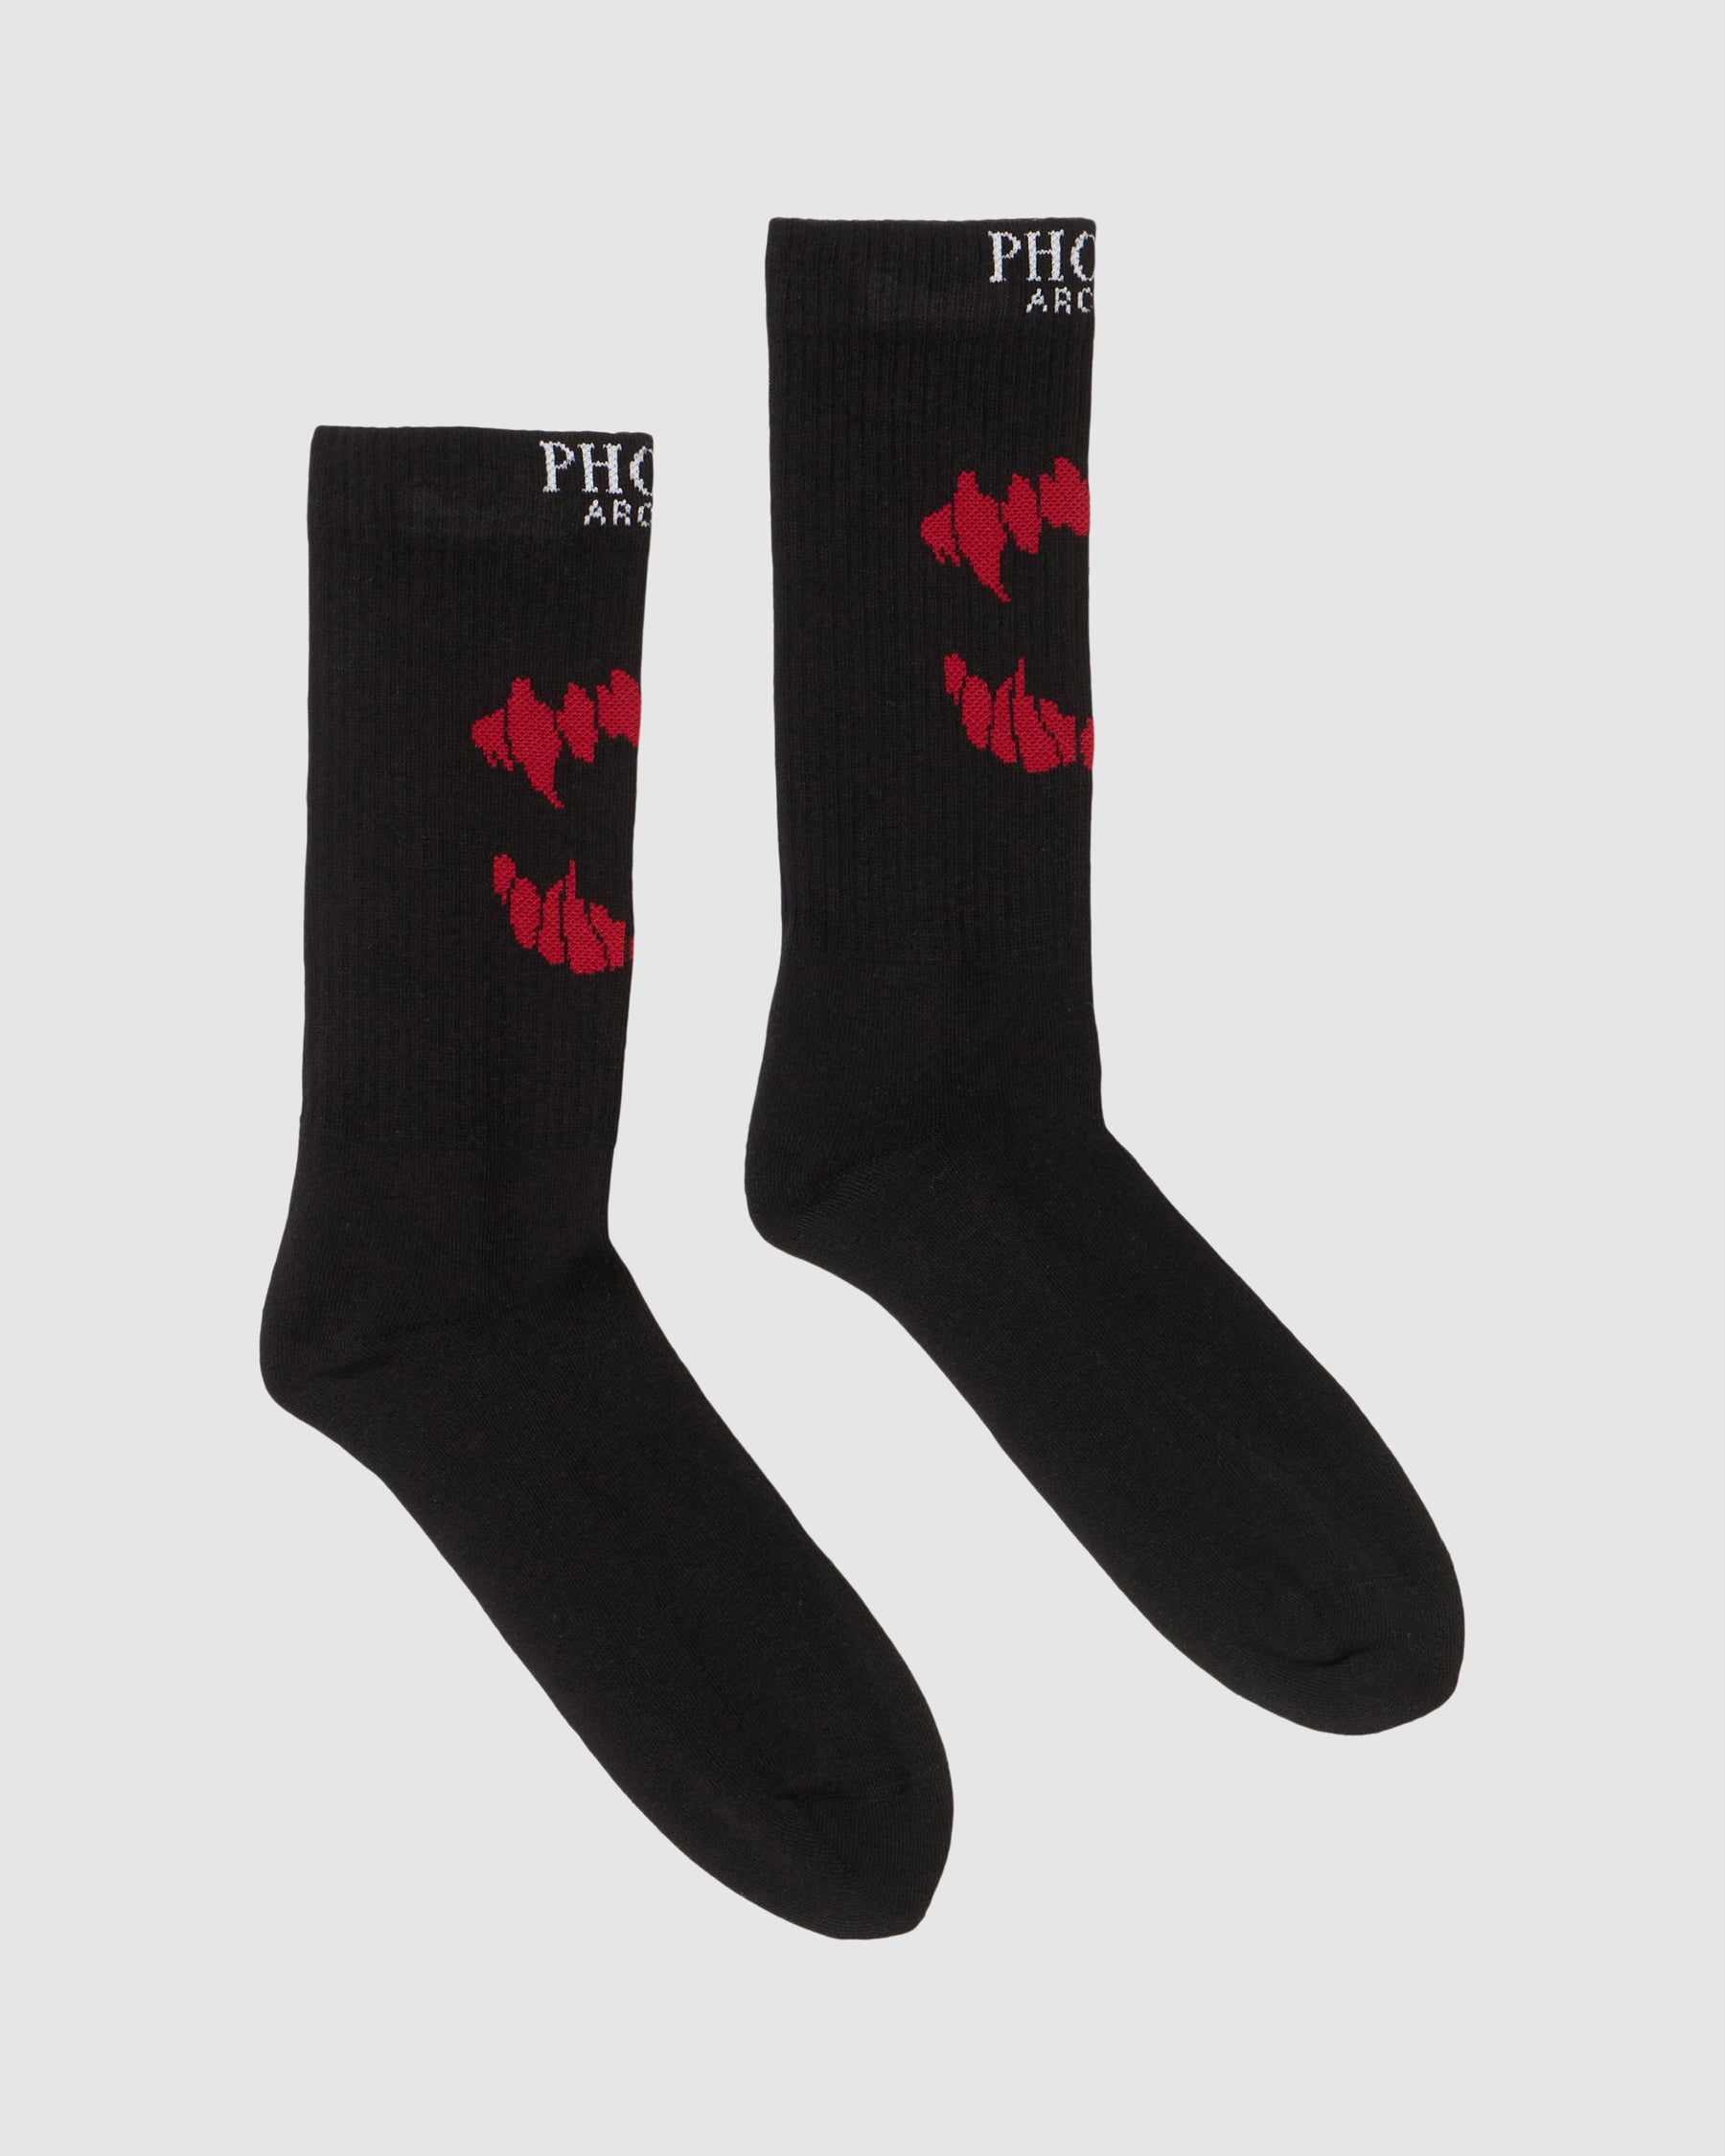 PHOBIA BLACK SOCKS WITH RED MOUTH